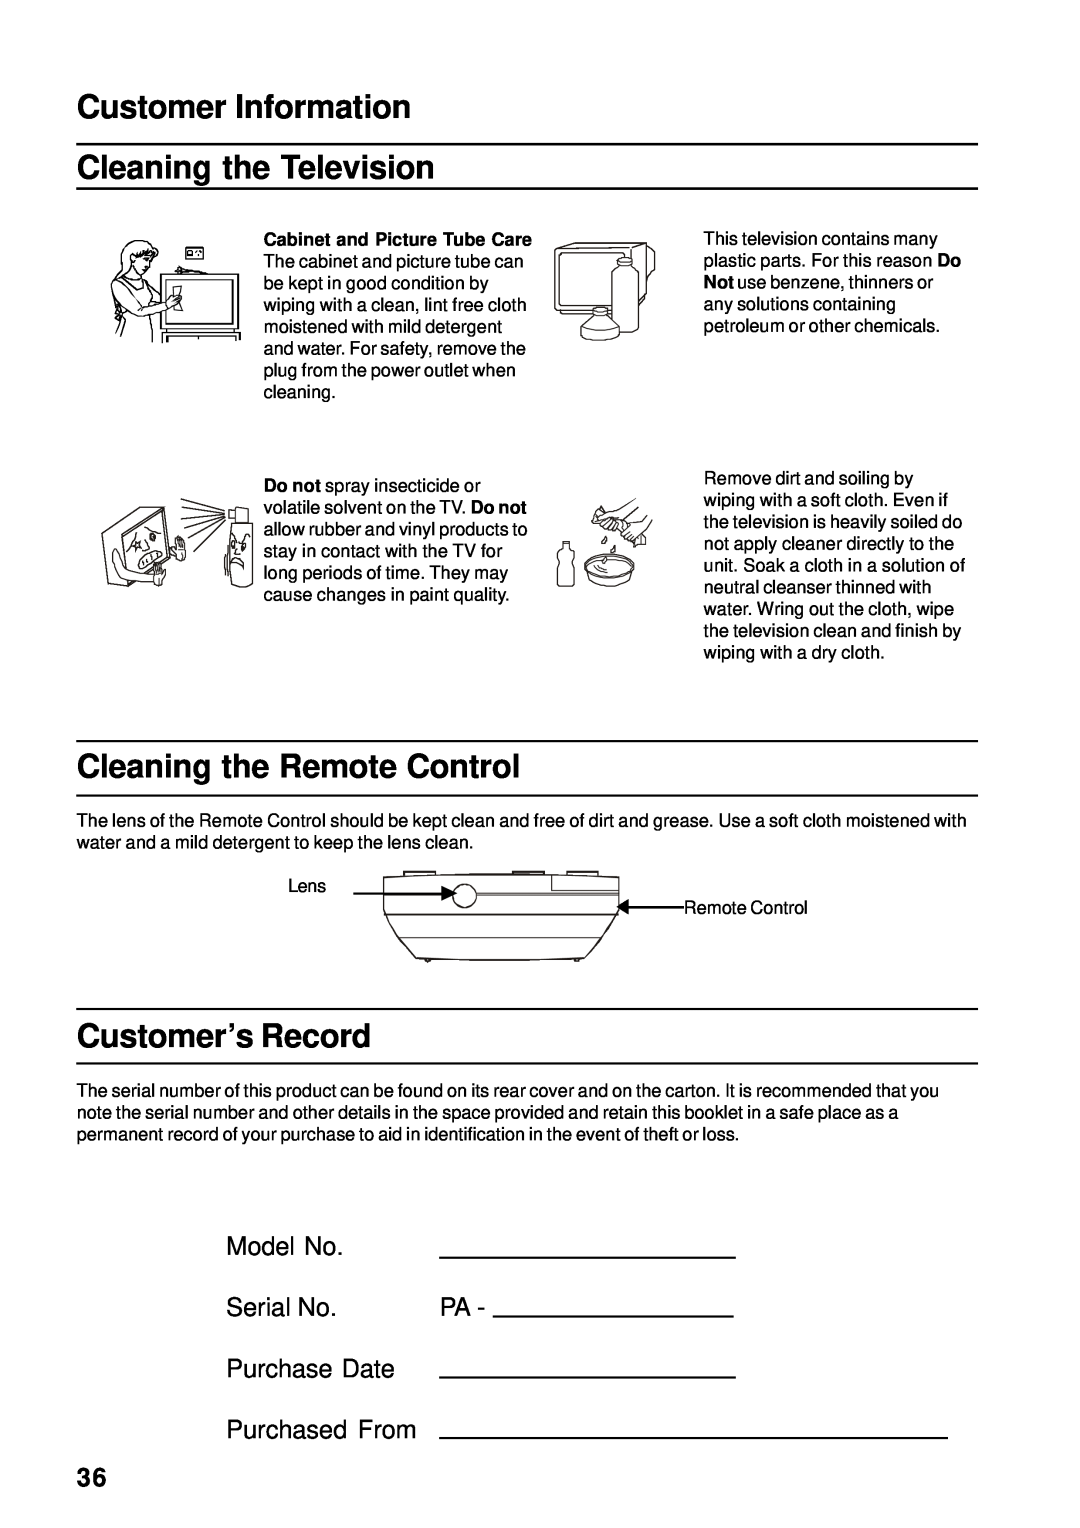 Panasonic TX-86PW155A Customer Information Cleaning the Television, Cleaning the Remote Control, Customer’s Record 